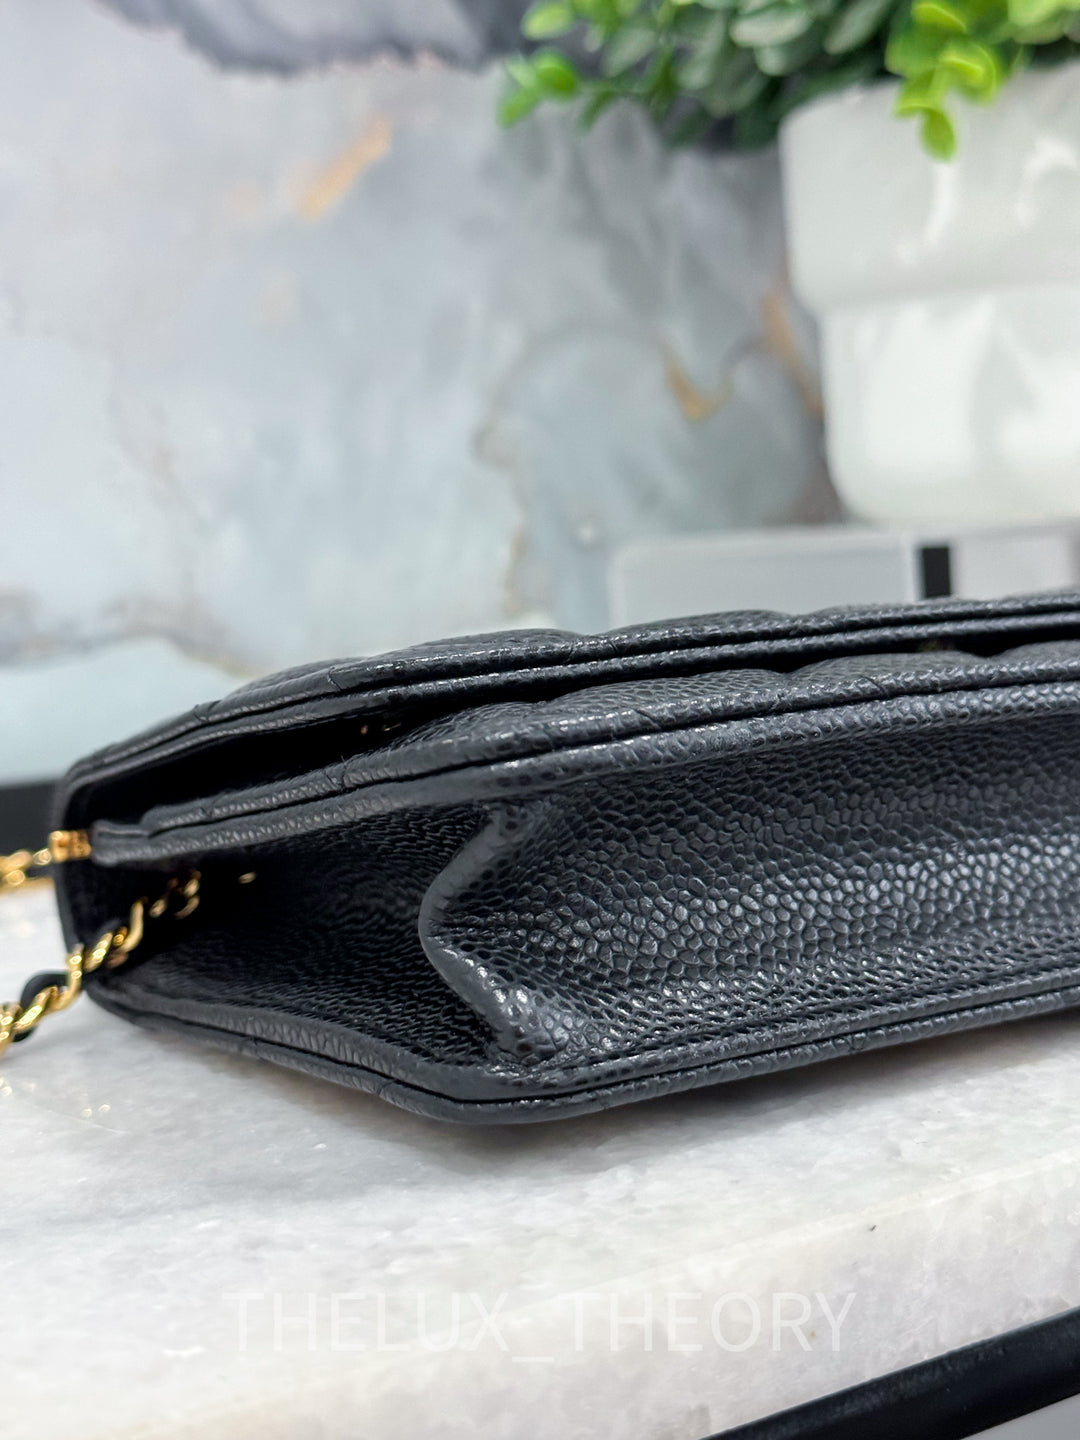 CLASSIC BLACK WALLET ON CHAIN CAVIAR GOLD HARDWARE 2021